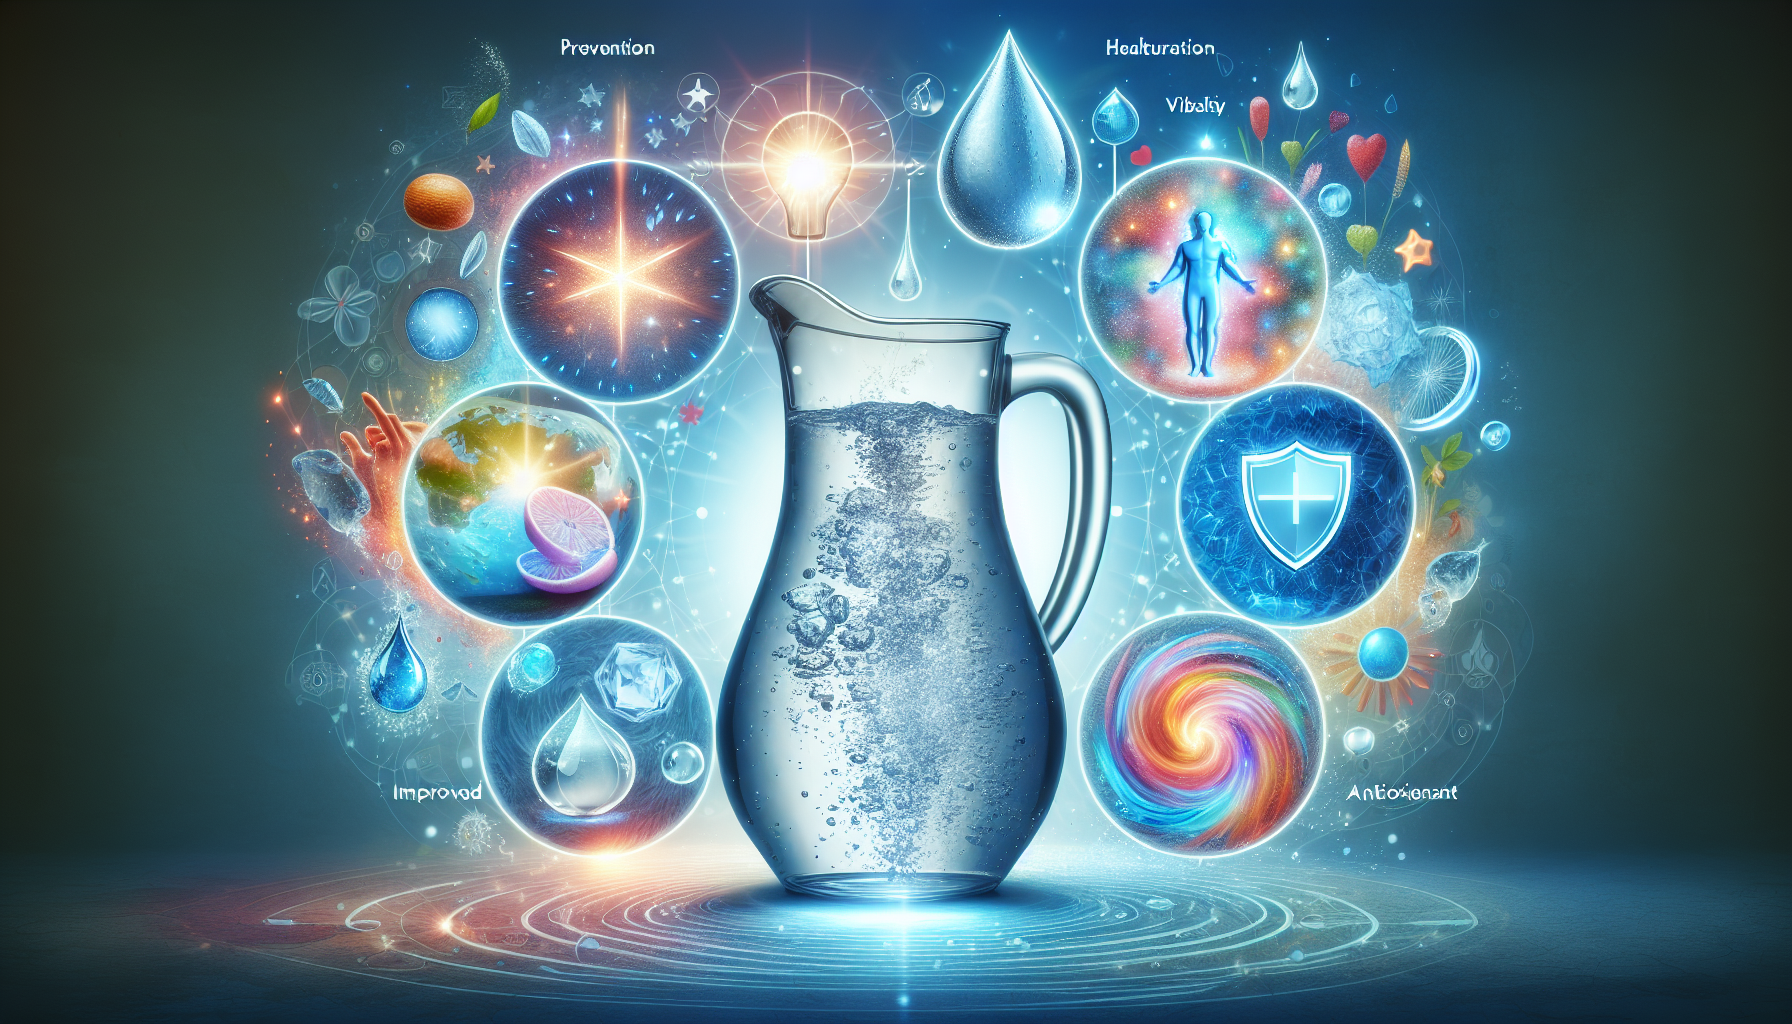 Illustration of Healthier Living with Filtered Water